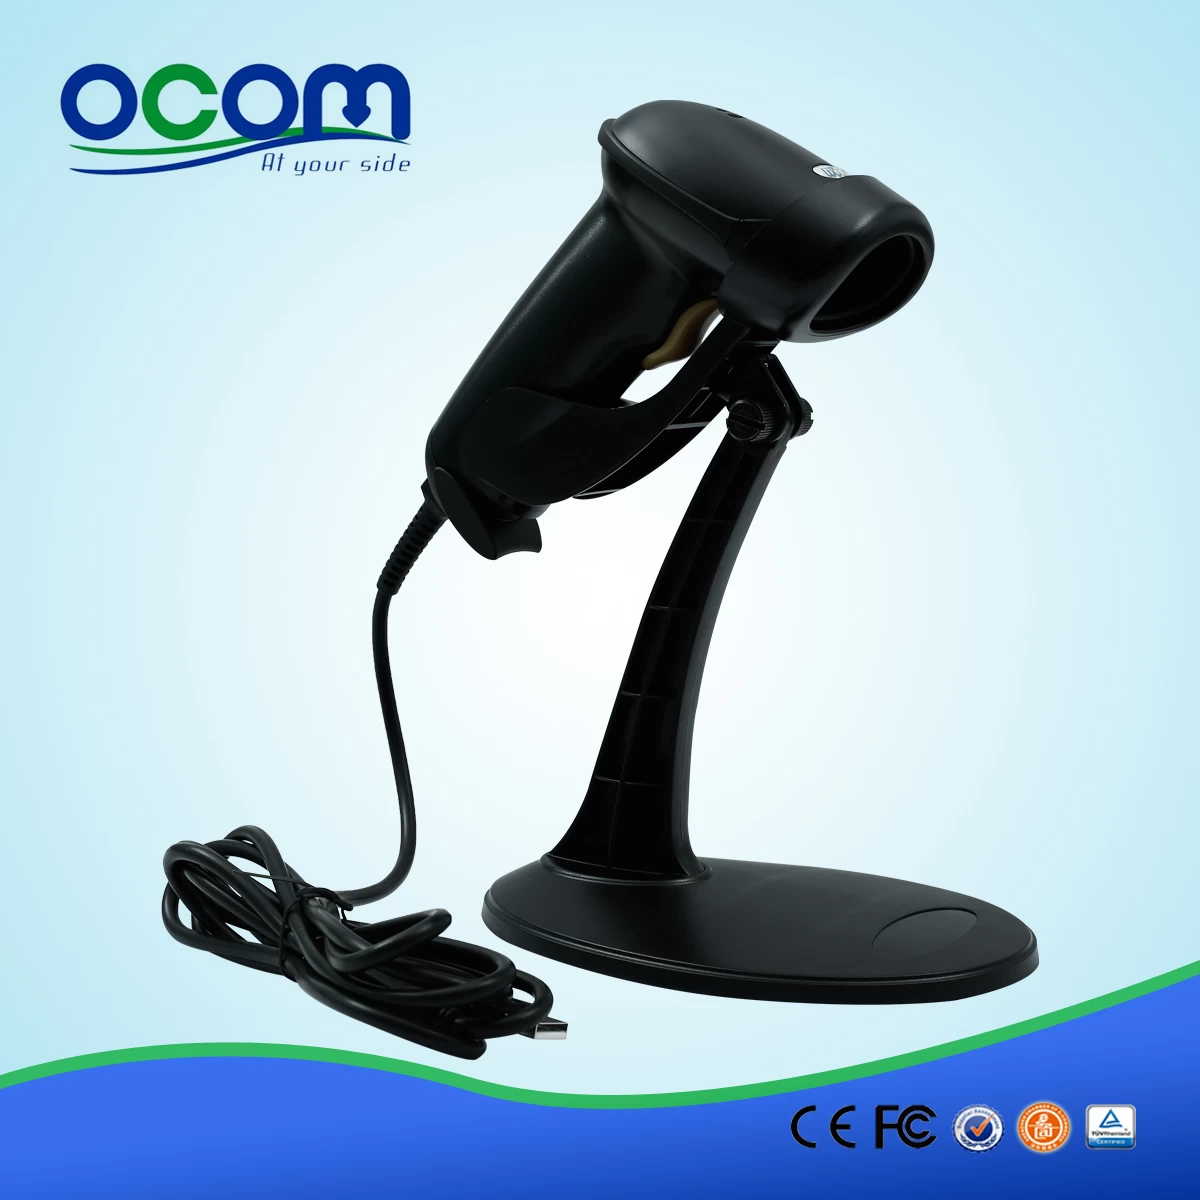 Pos android barcode laser scanner,best selling model (OCBS-LA04 )